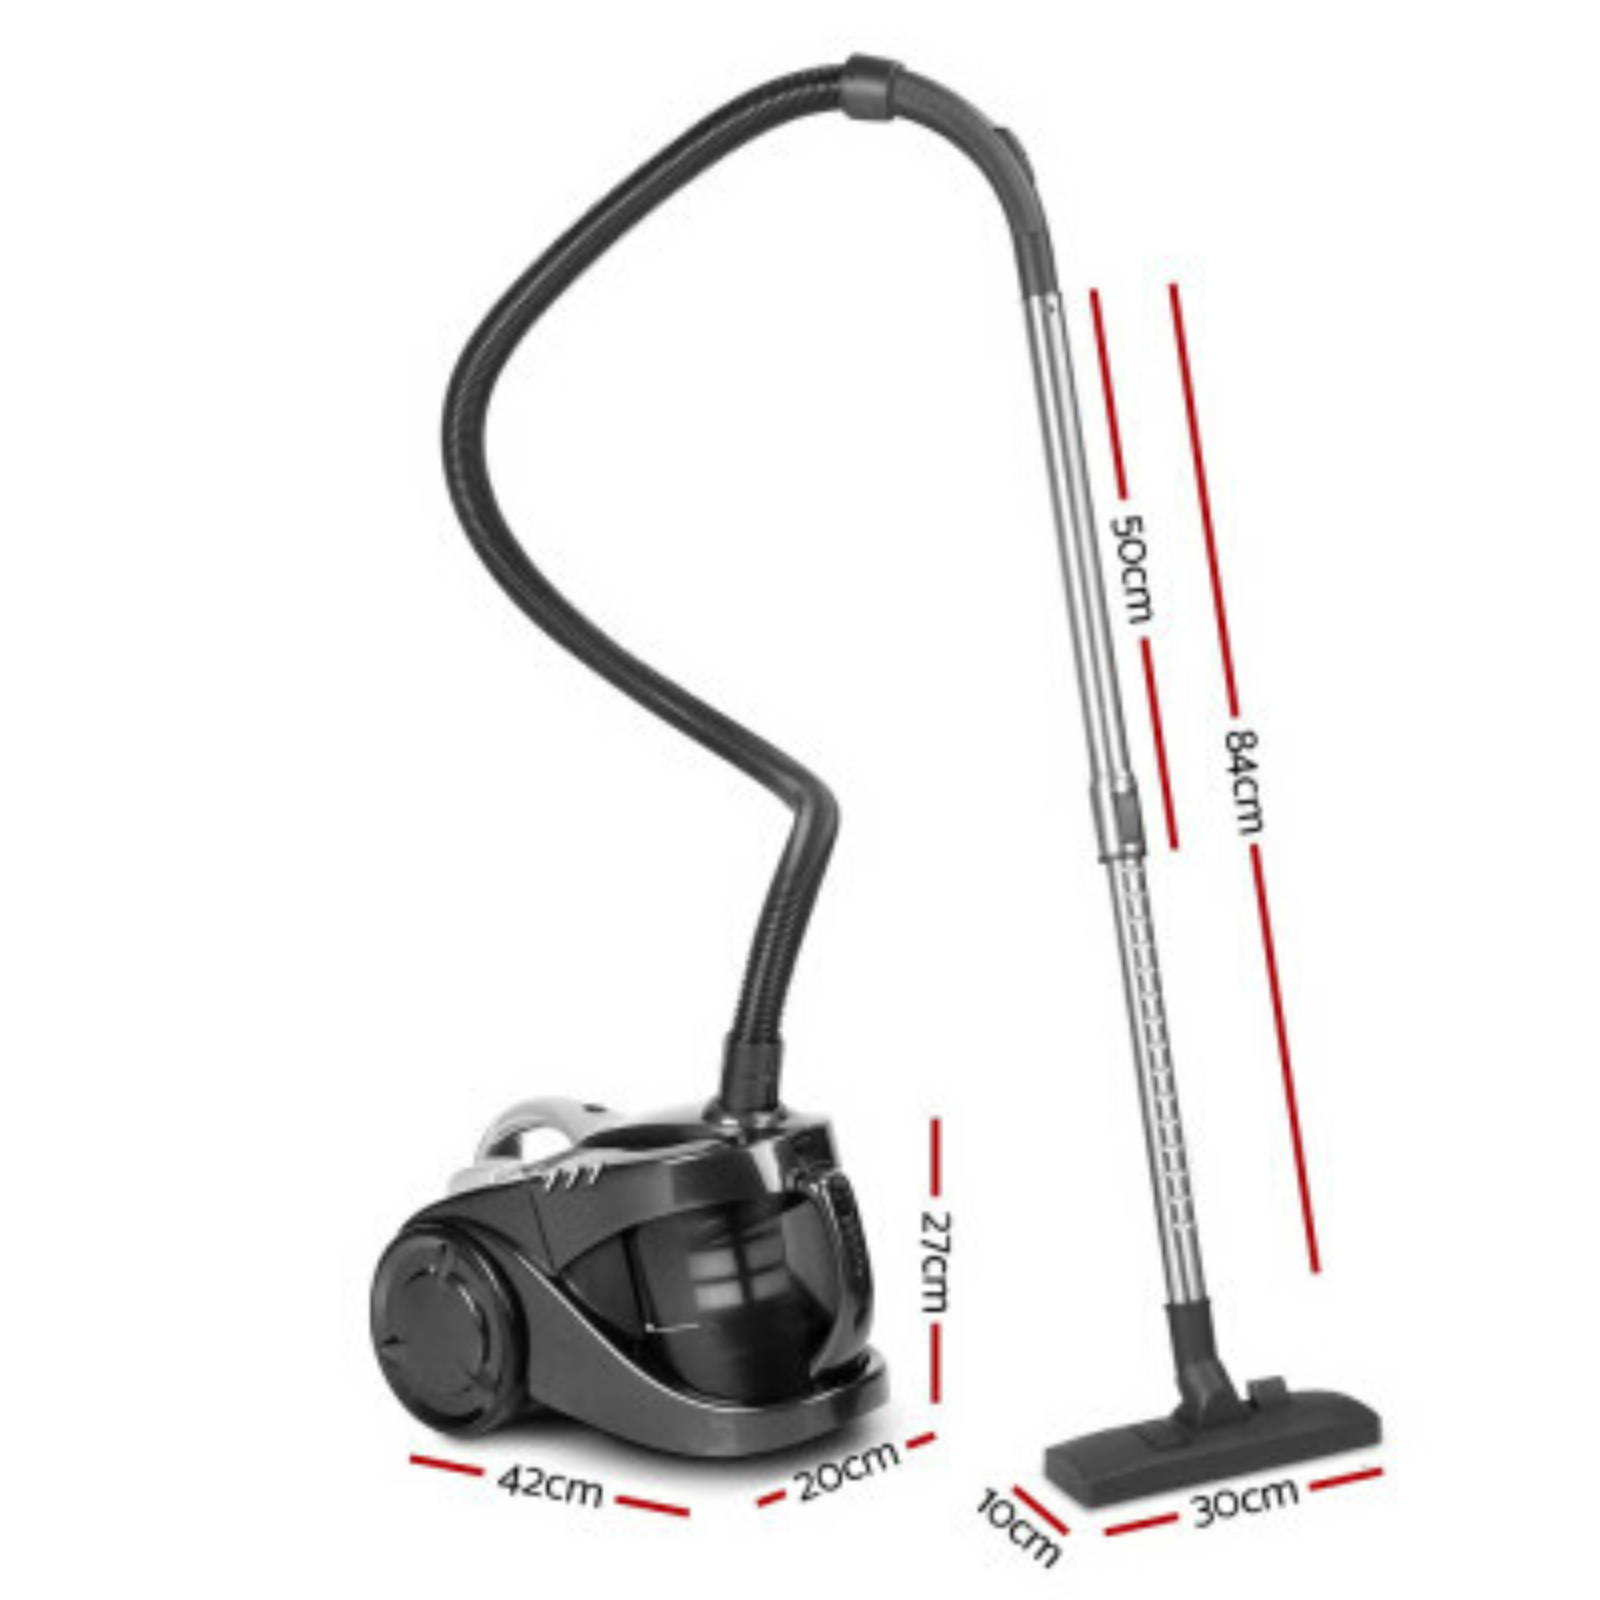 Bagless Vacuum Cleaner has dimensions of 42 x 20 x 27 cm for the vacuum and 30 x 10 x 84 cm for the stick handle